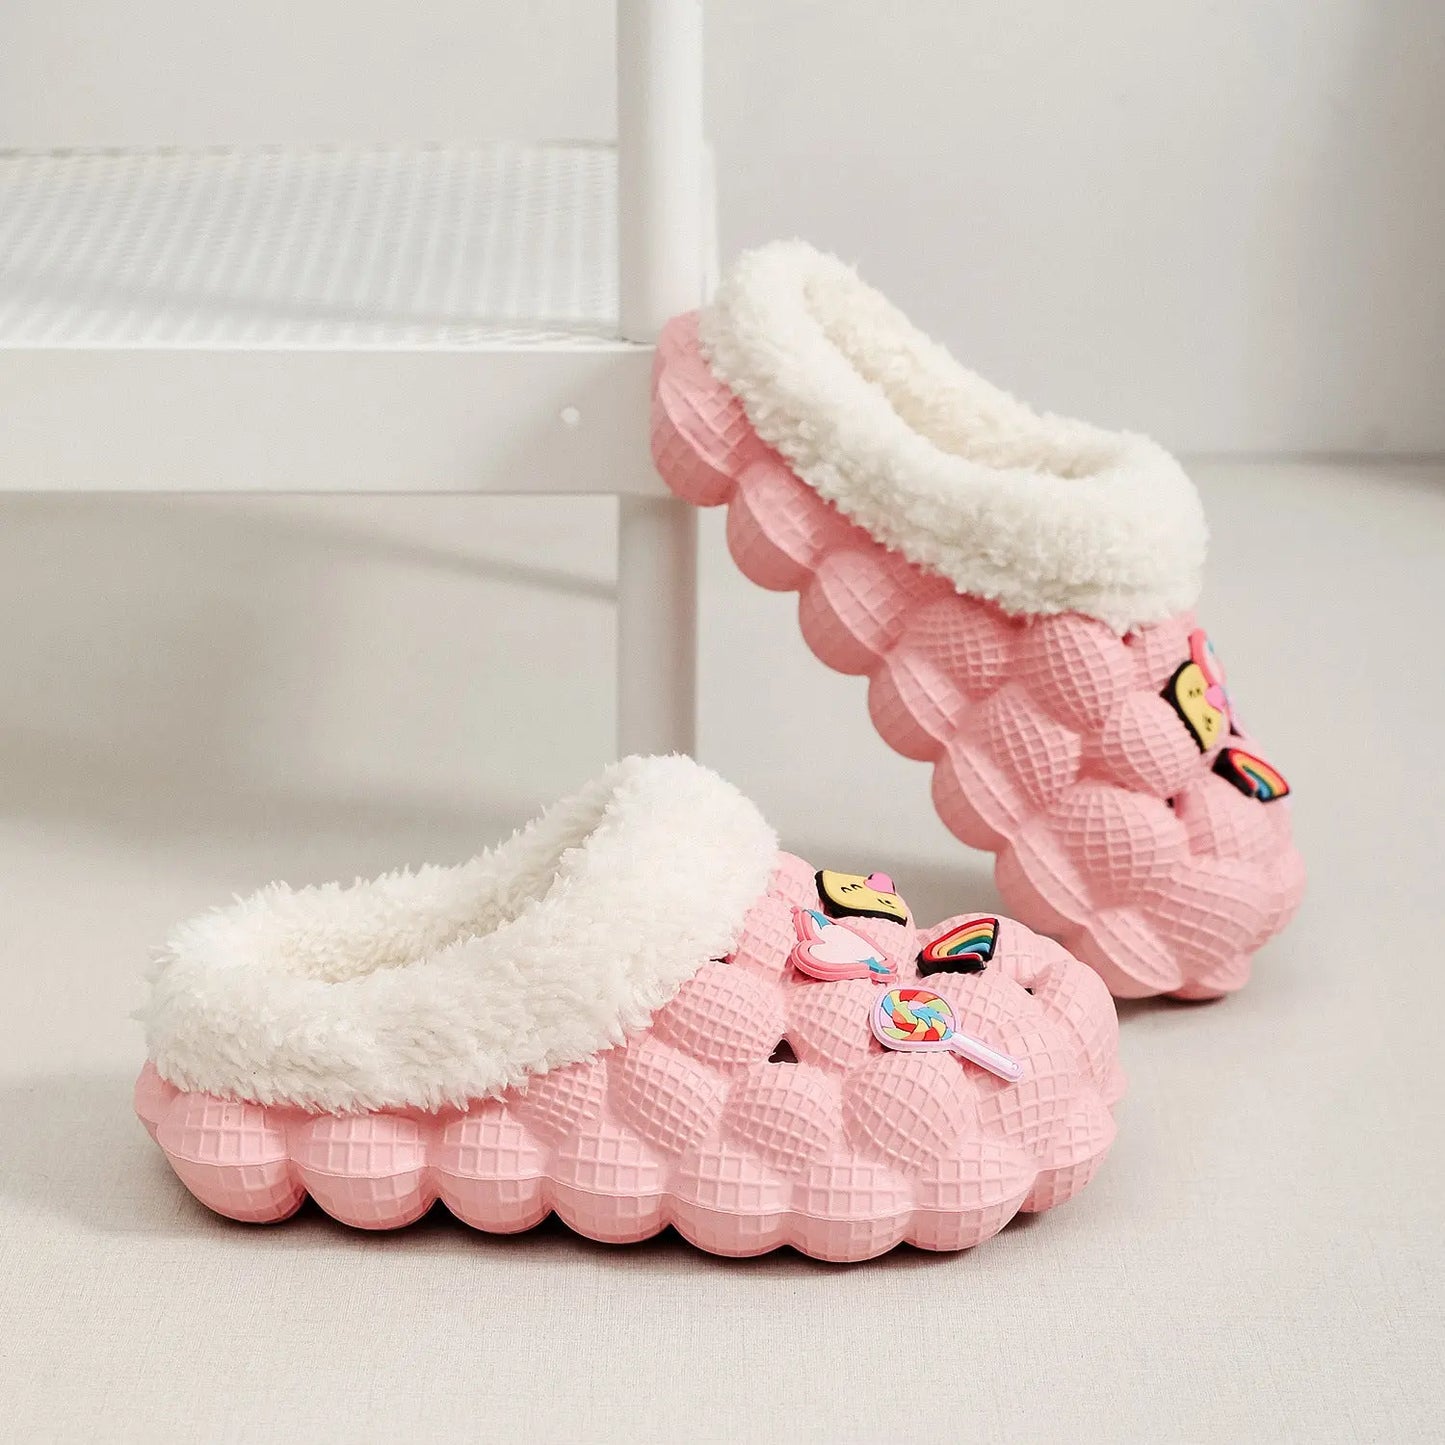 Casual comfort Slippers cjdropshipping